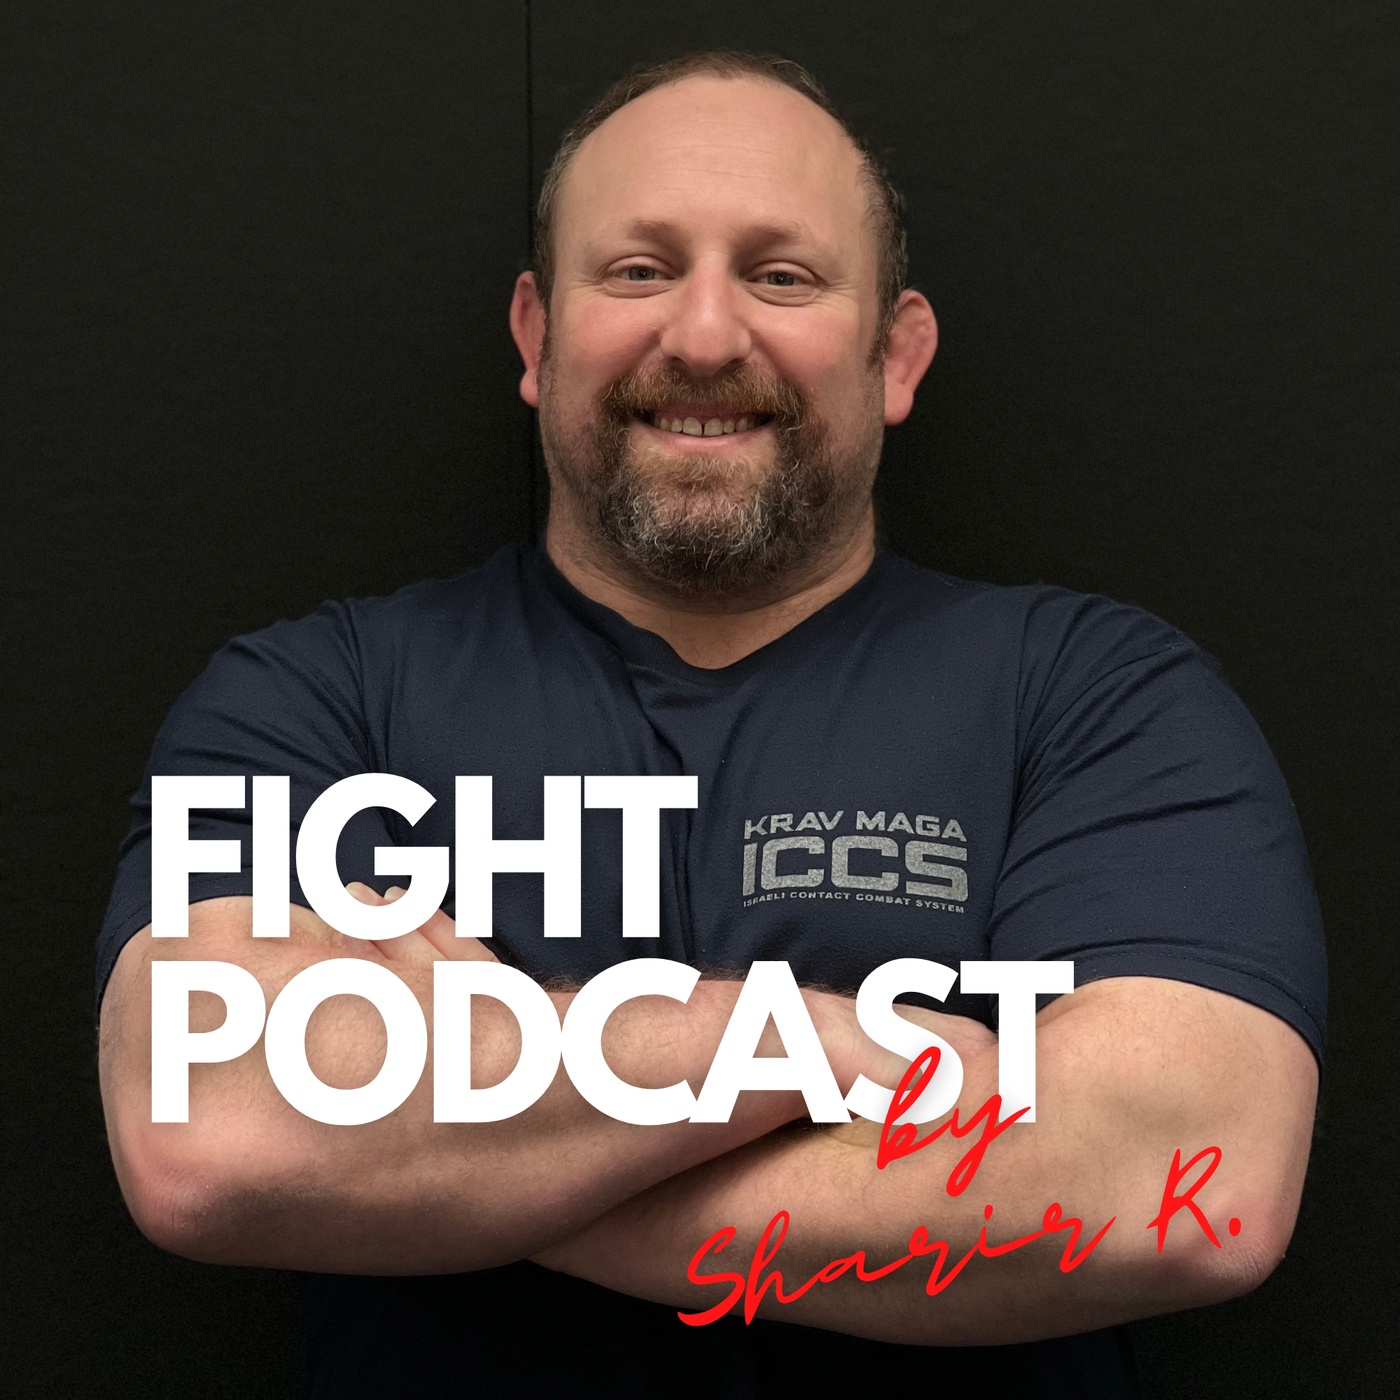 FP #14: ICCS and why it doesn’t say “Krav Maga” in the title